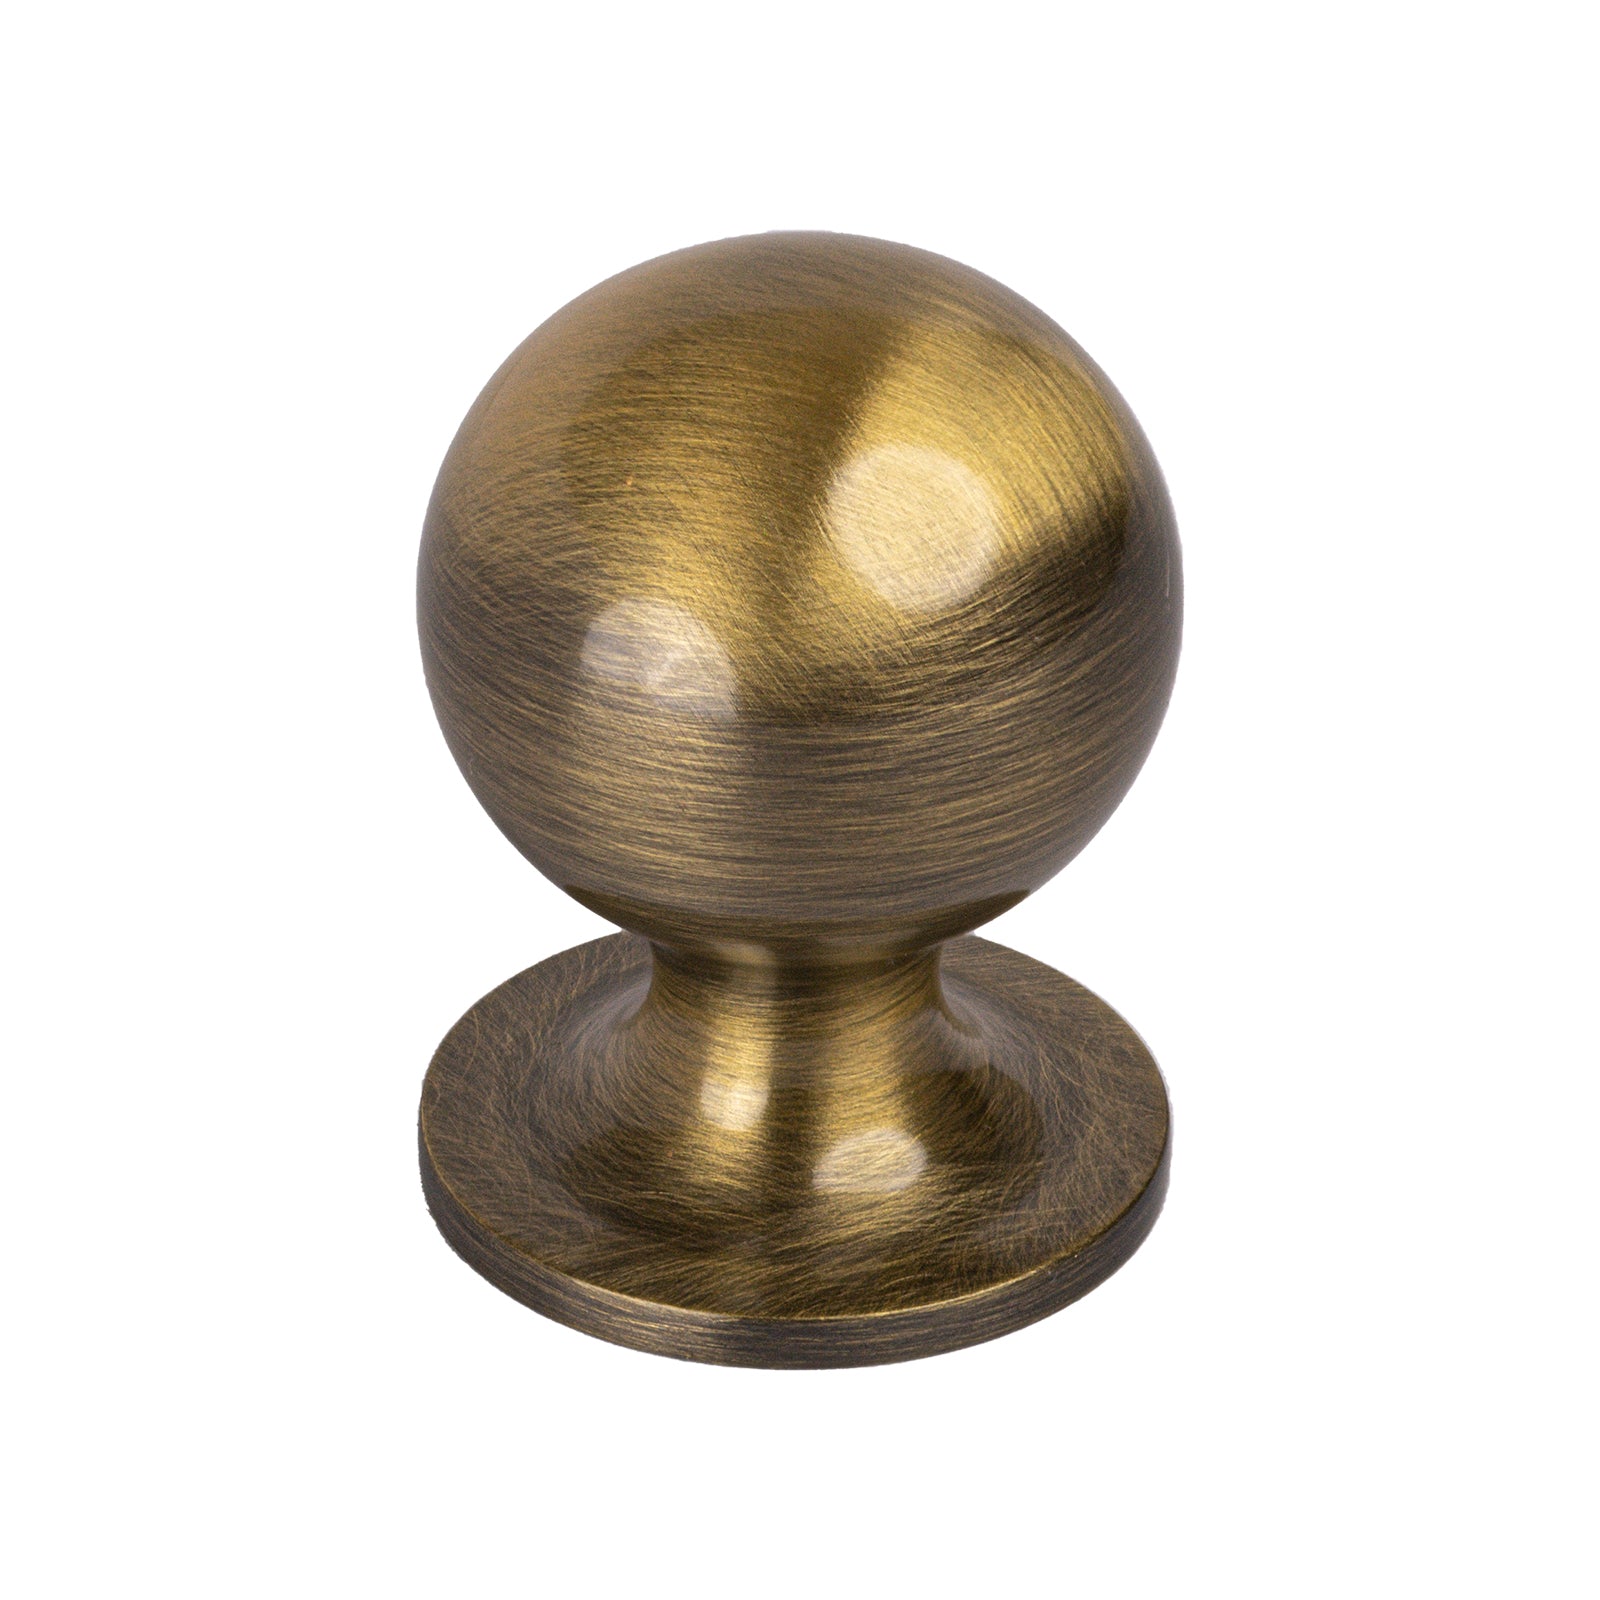 ball cabinet knob for kitchen cupboards and drawers